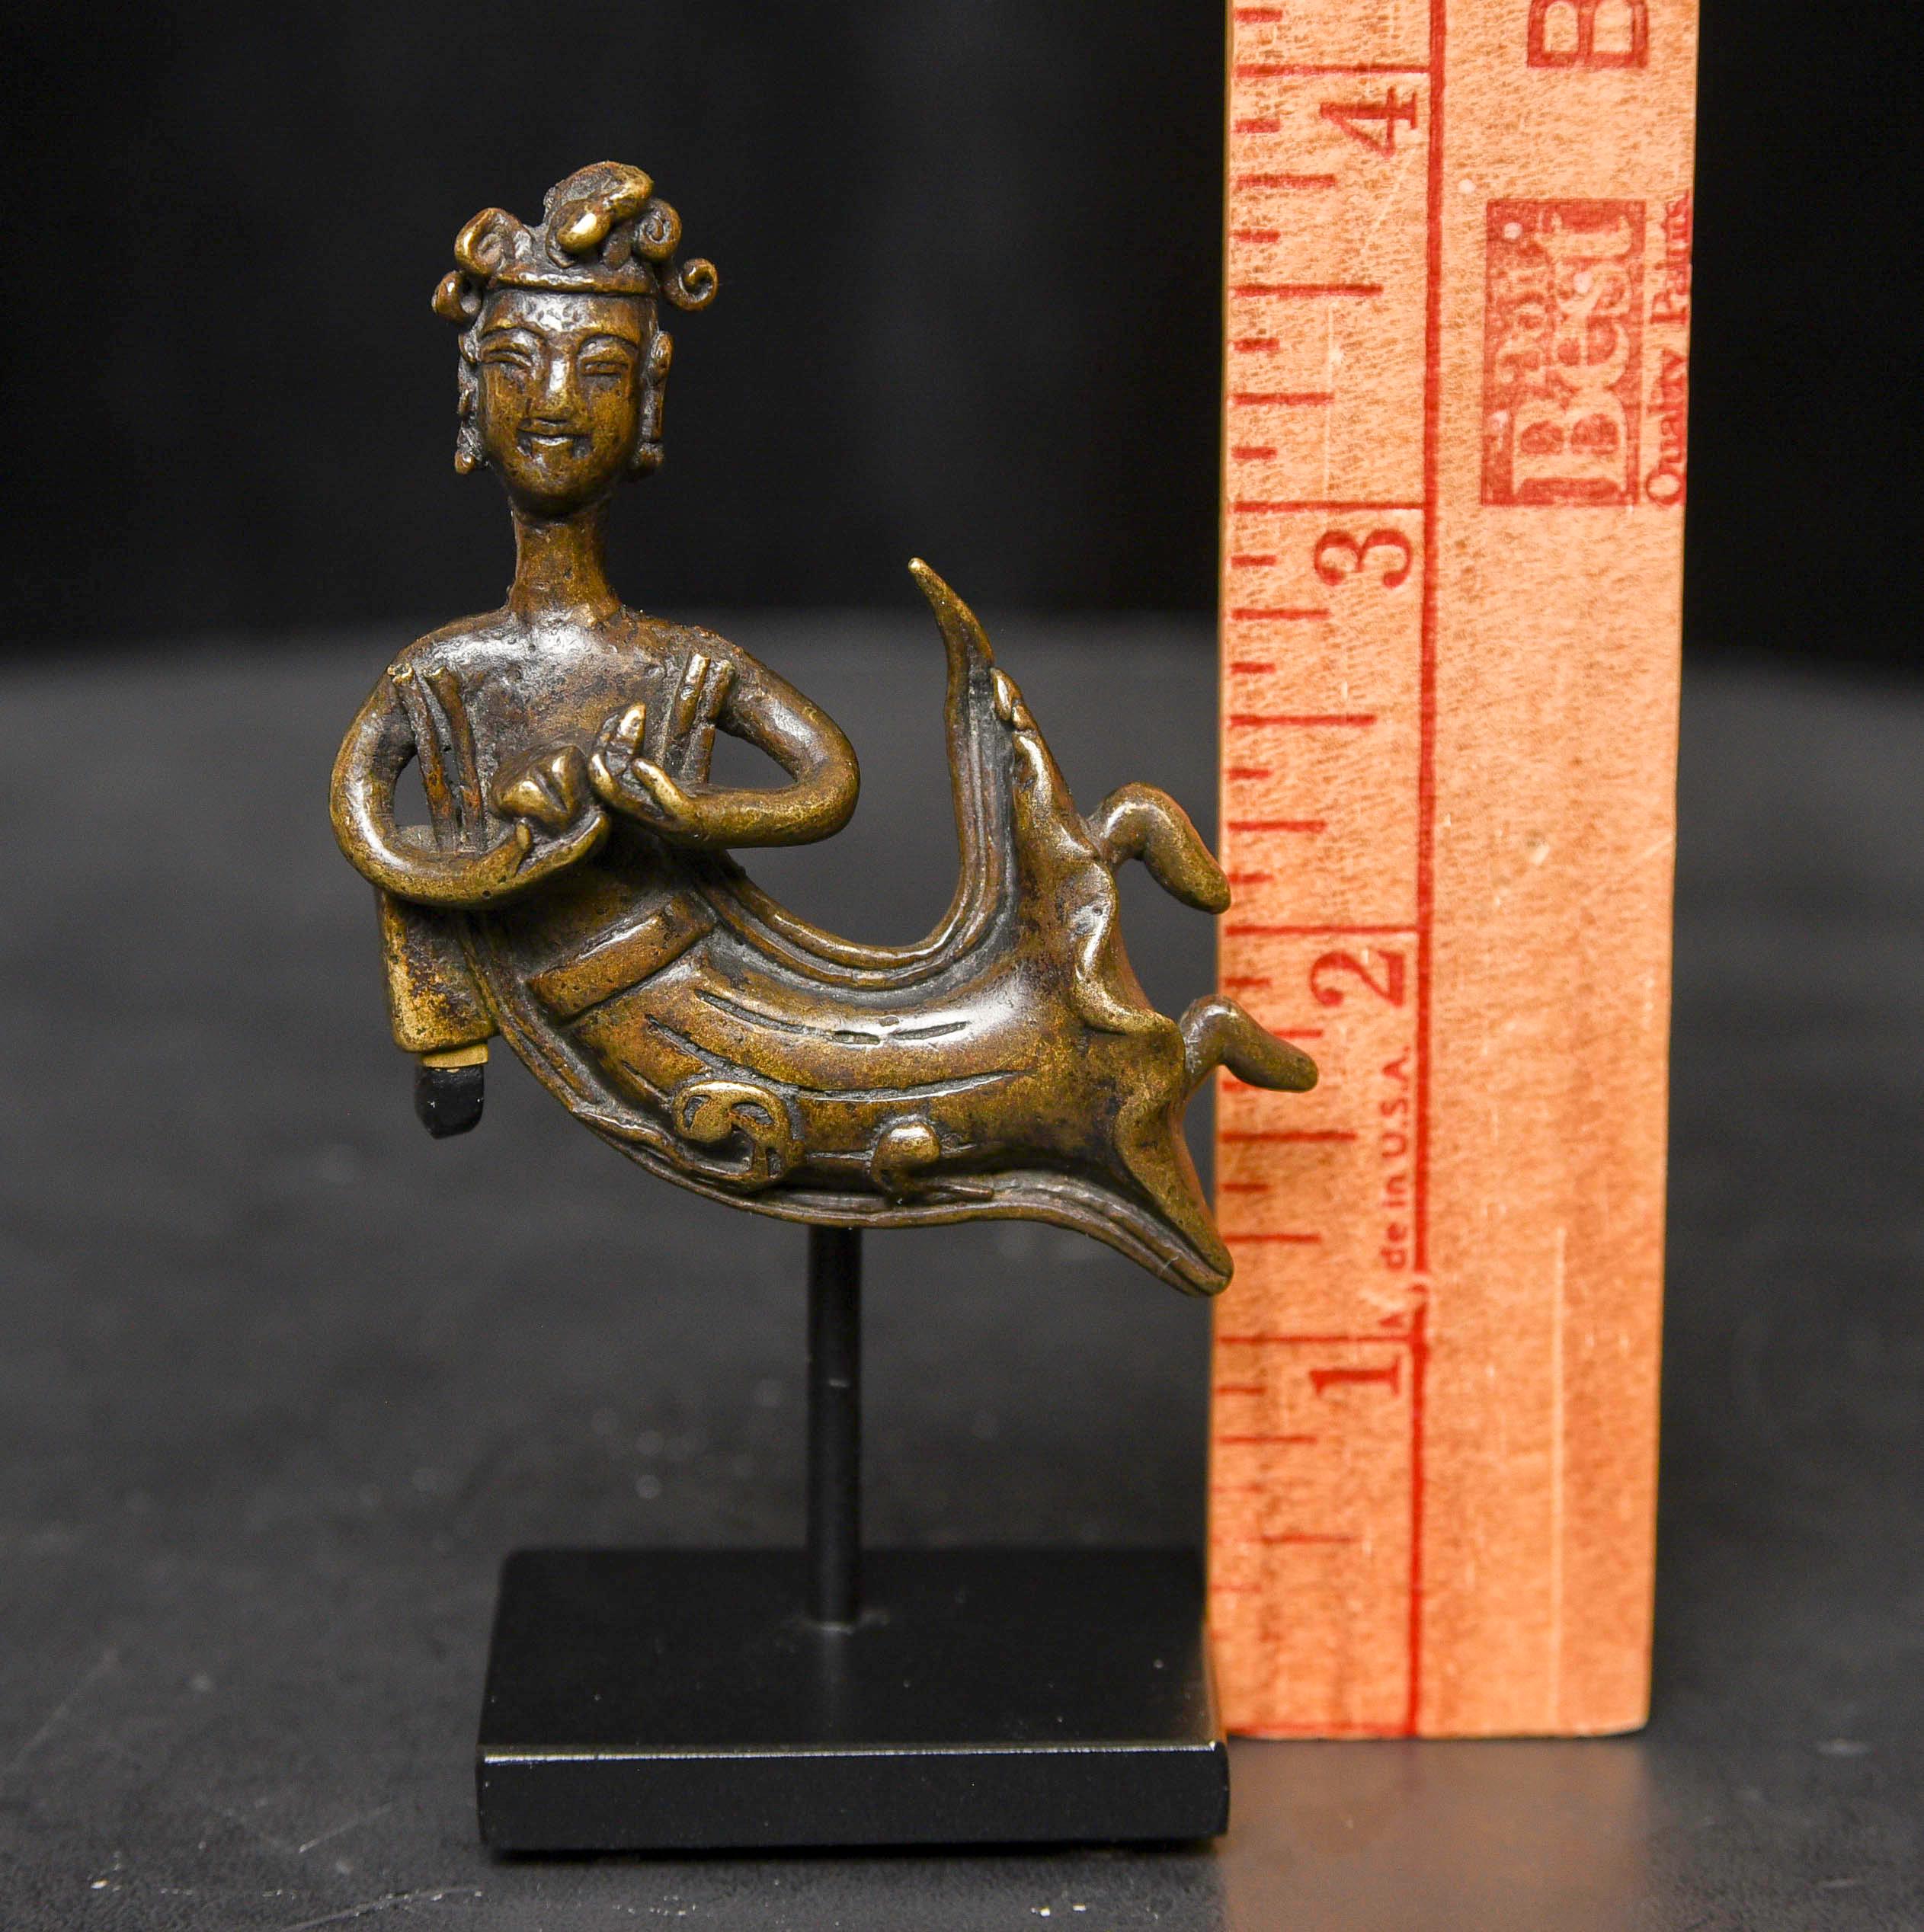 Cast 5/6thC Chinese Bronze Buddha - 9585 For Sale